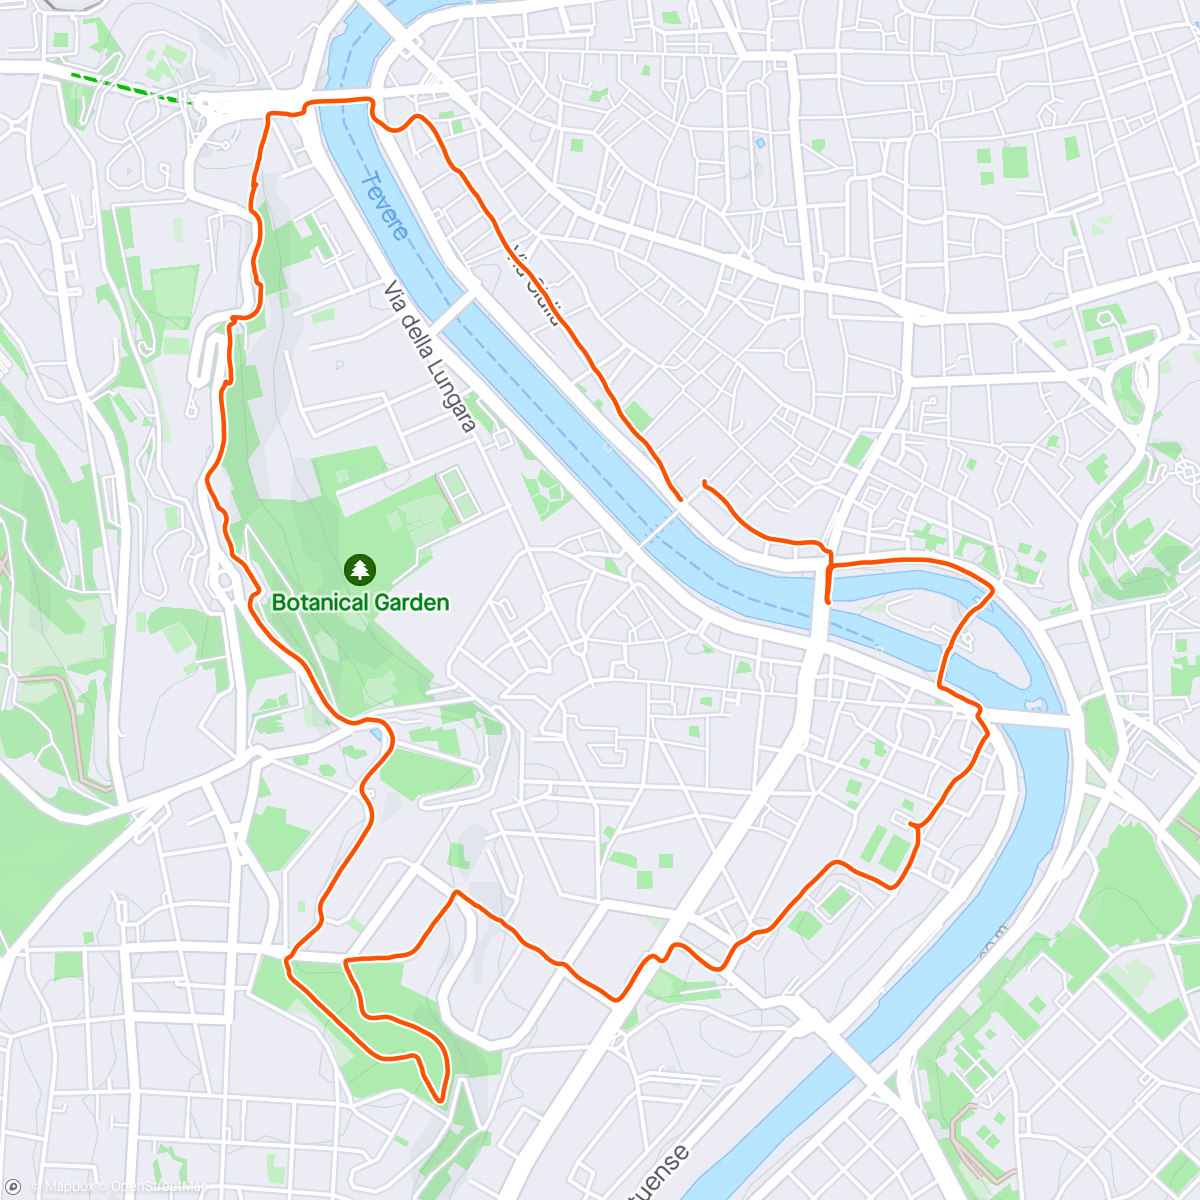 Map of the activity, Morgenjogg